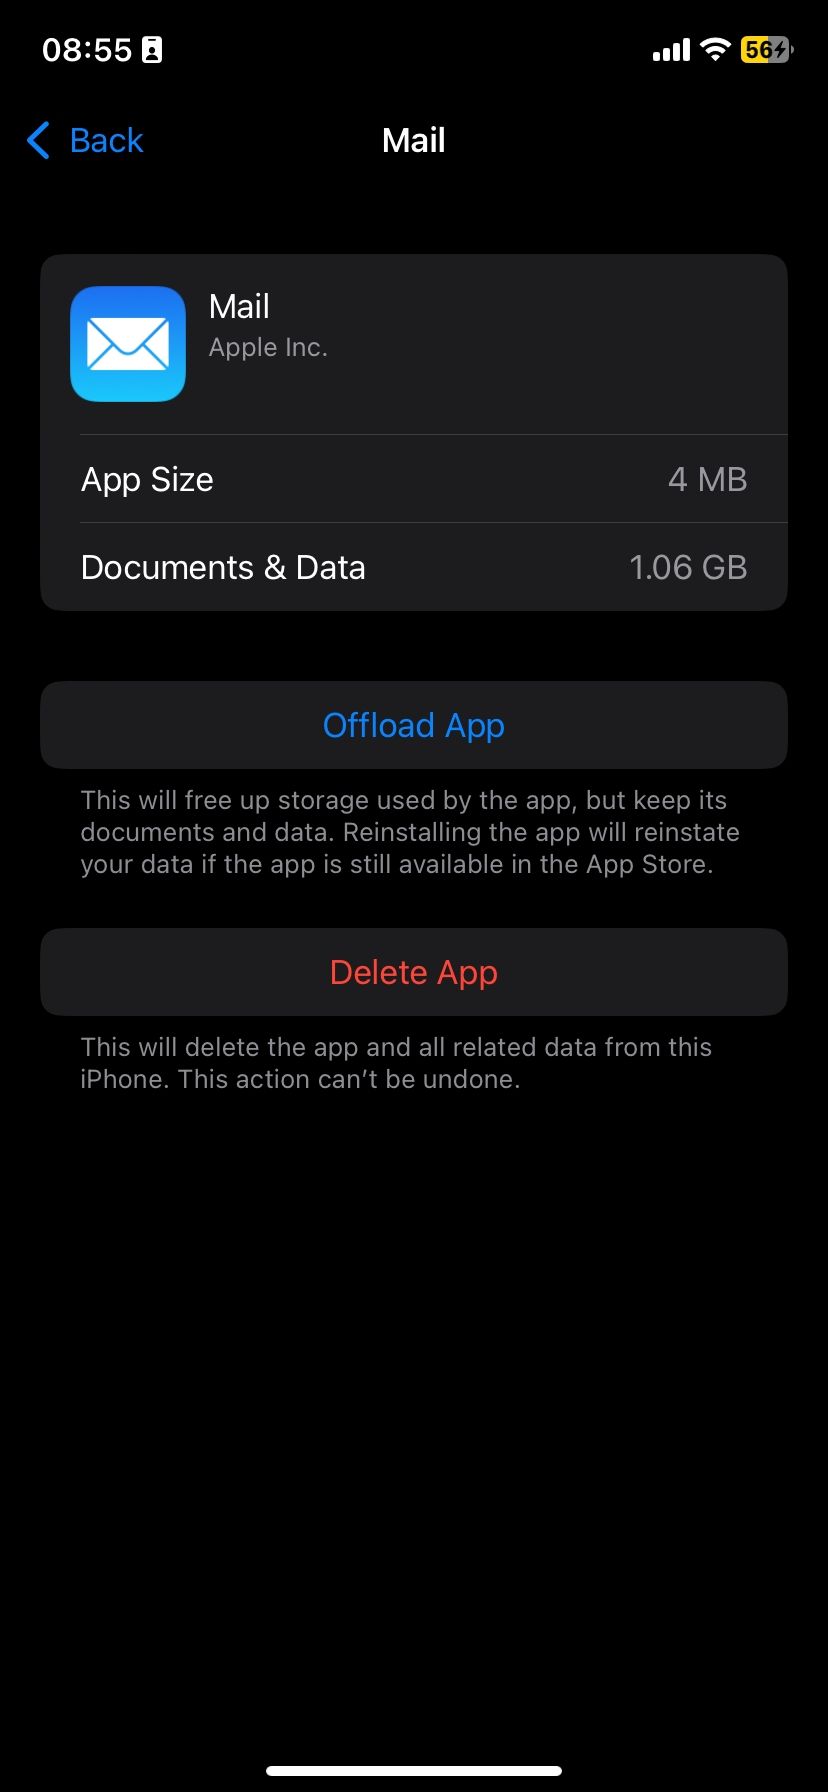 Mail app's Documents & Data size on iPhone